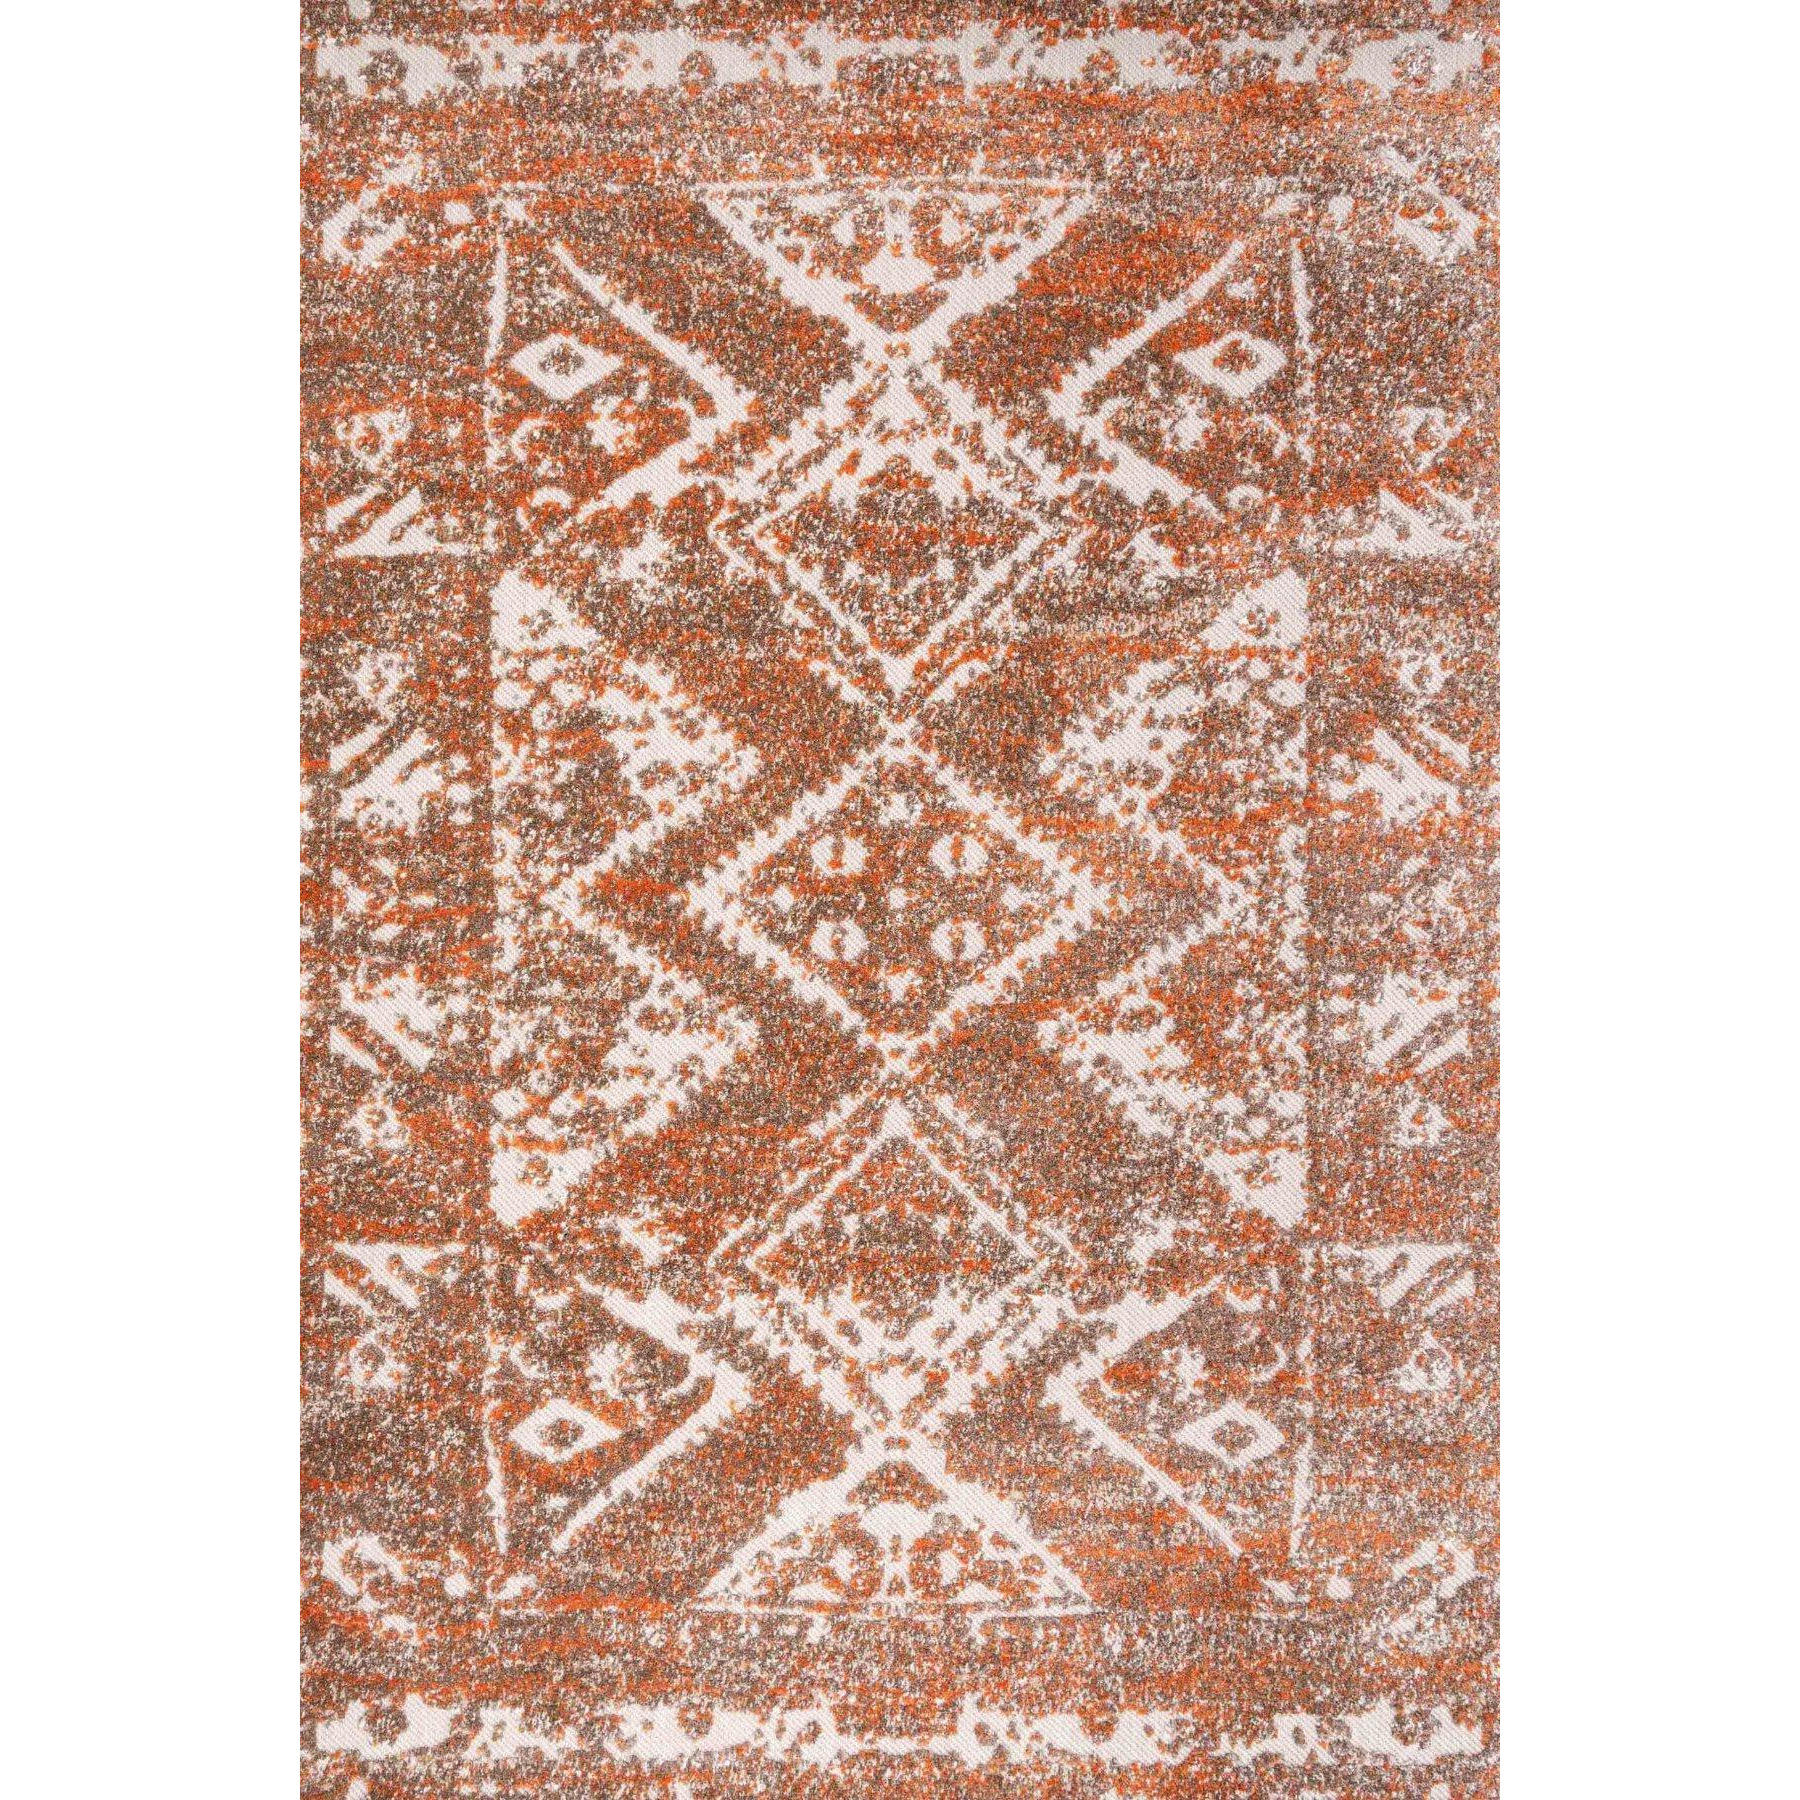 Distressed Terracotta Outdoor, Garden and Patio Area Rug - image 1